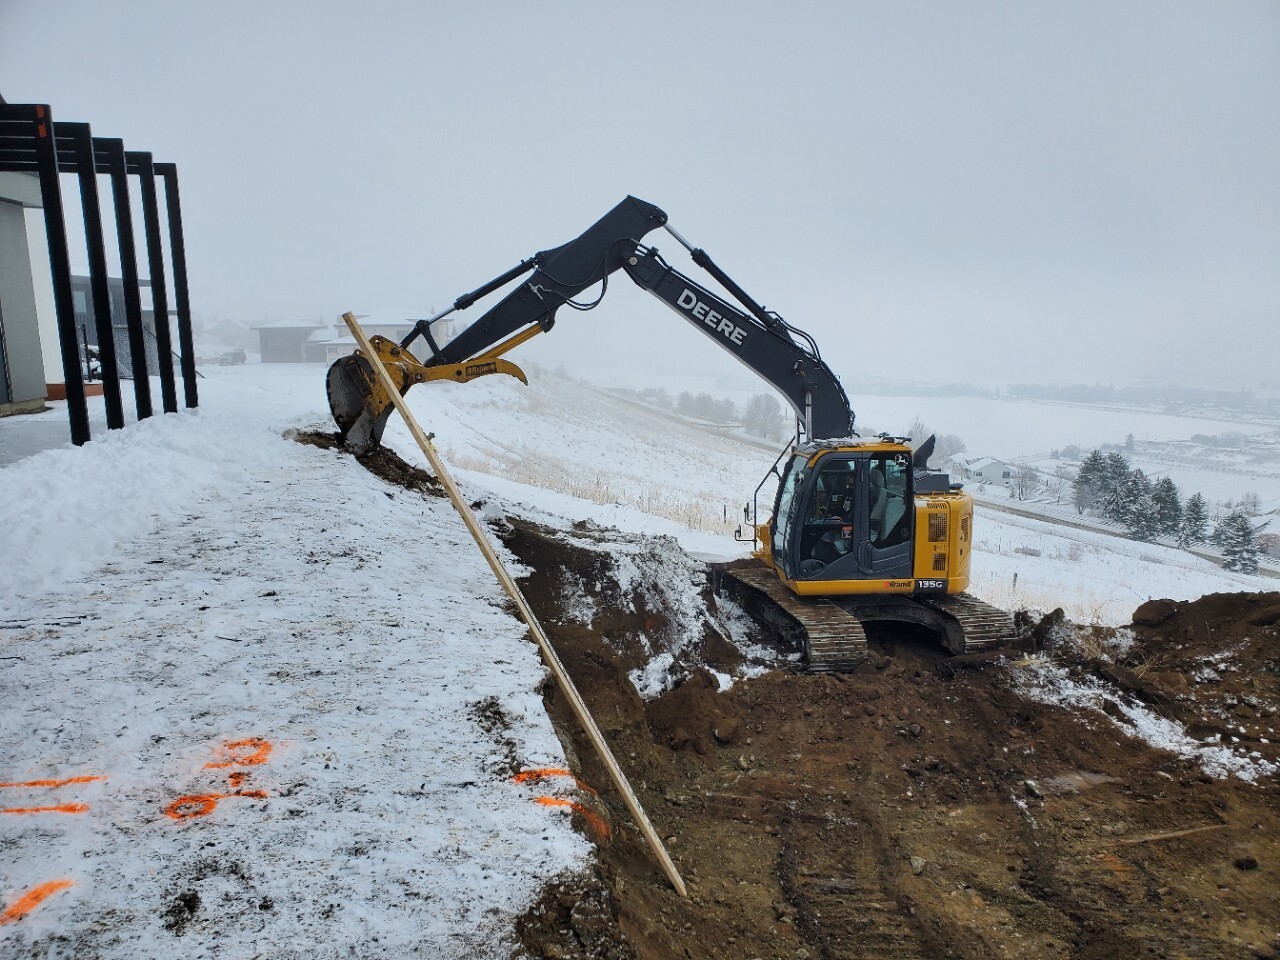 A yellow and black excavator digging in the snow